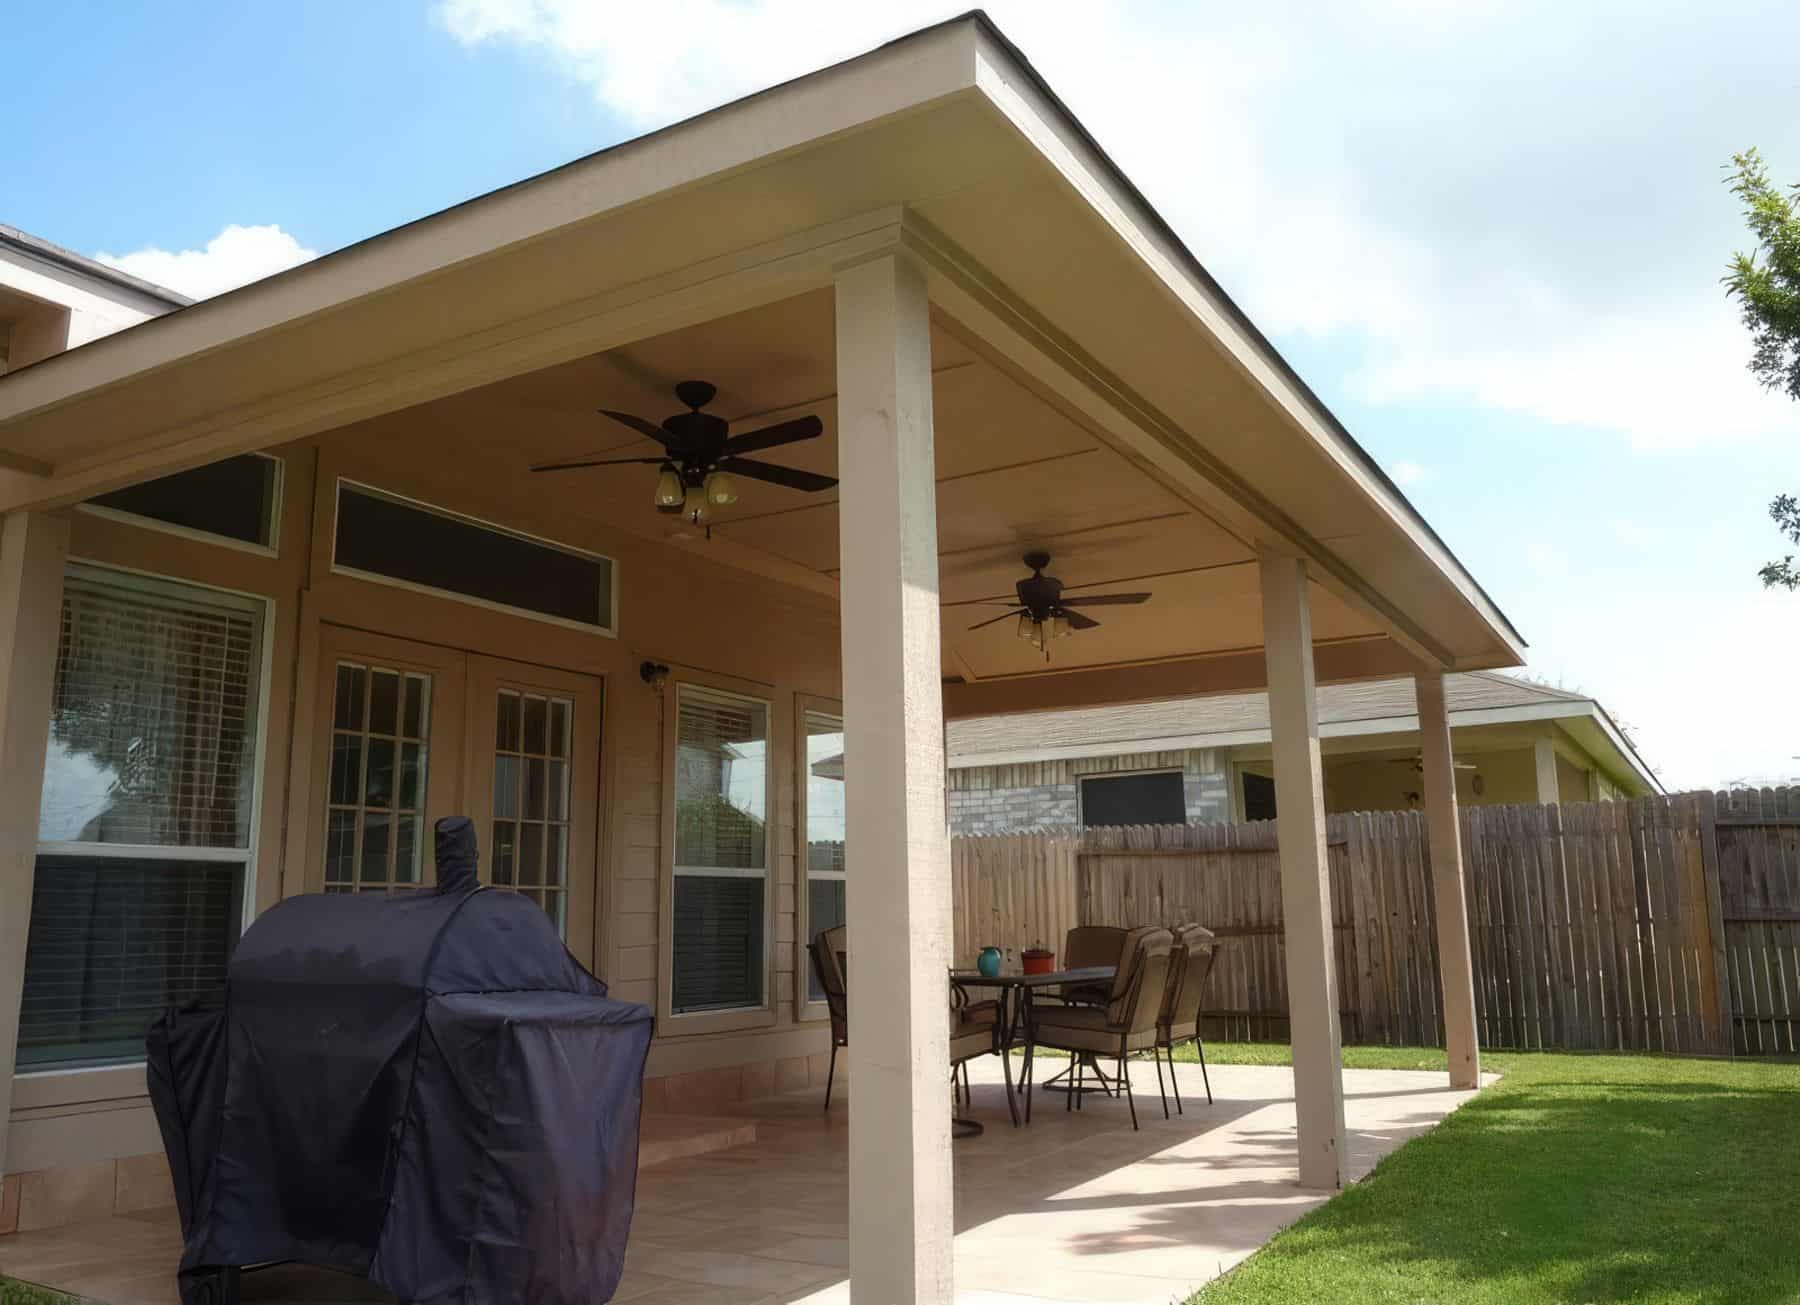 Outdoor furniture vinyl patio cover with ceiling fan, outdoor table & chairs on grassy lawn, surrounded by trees in the background.